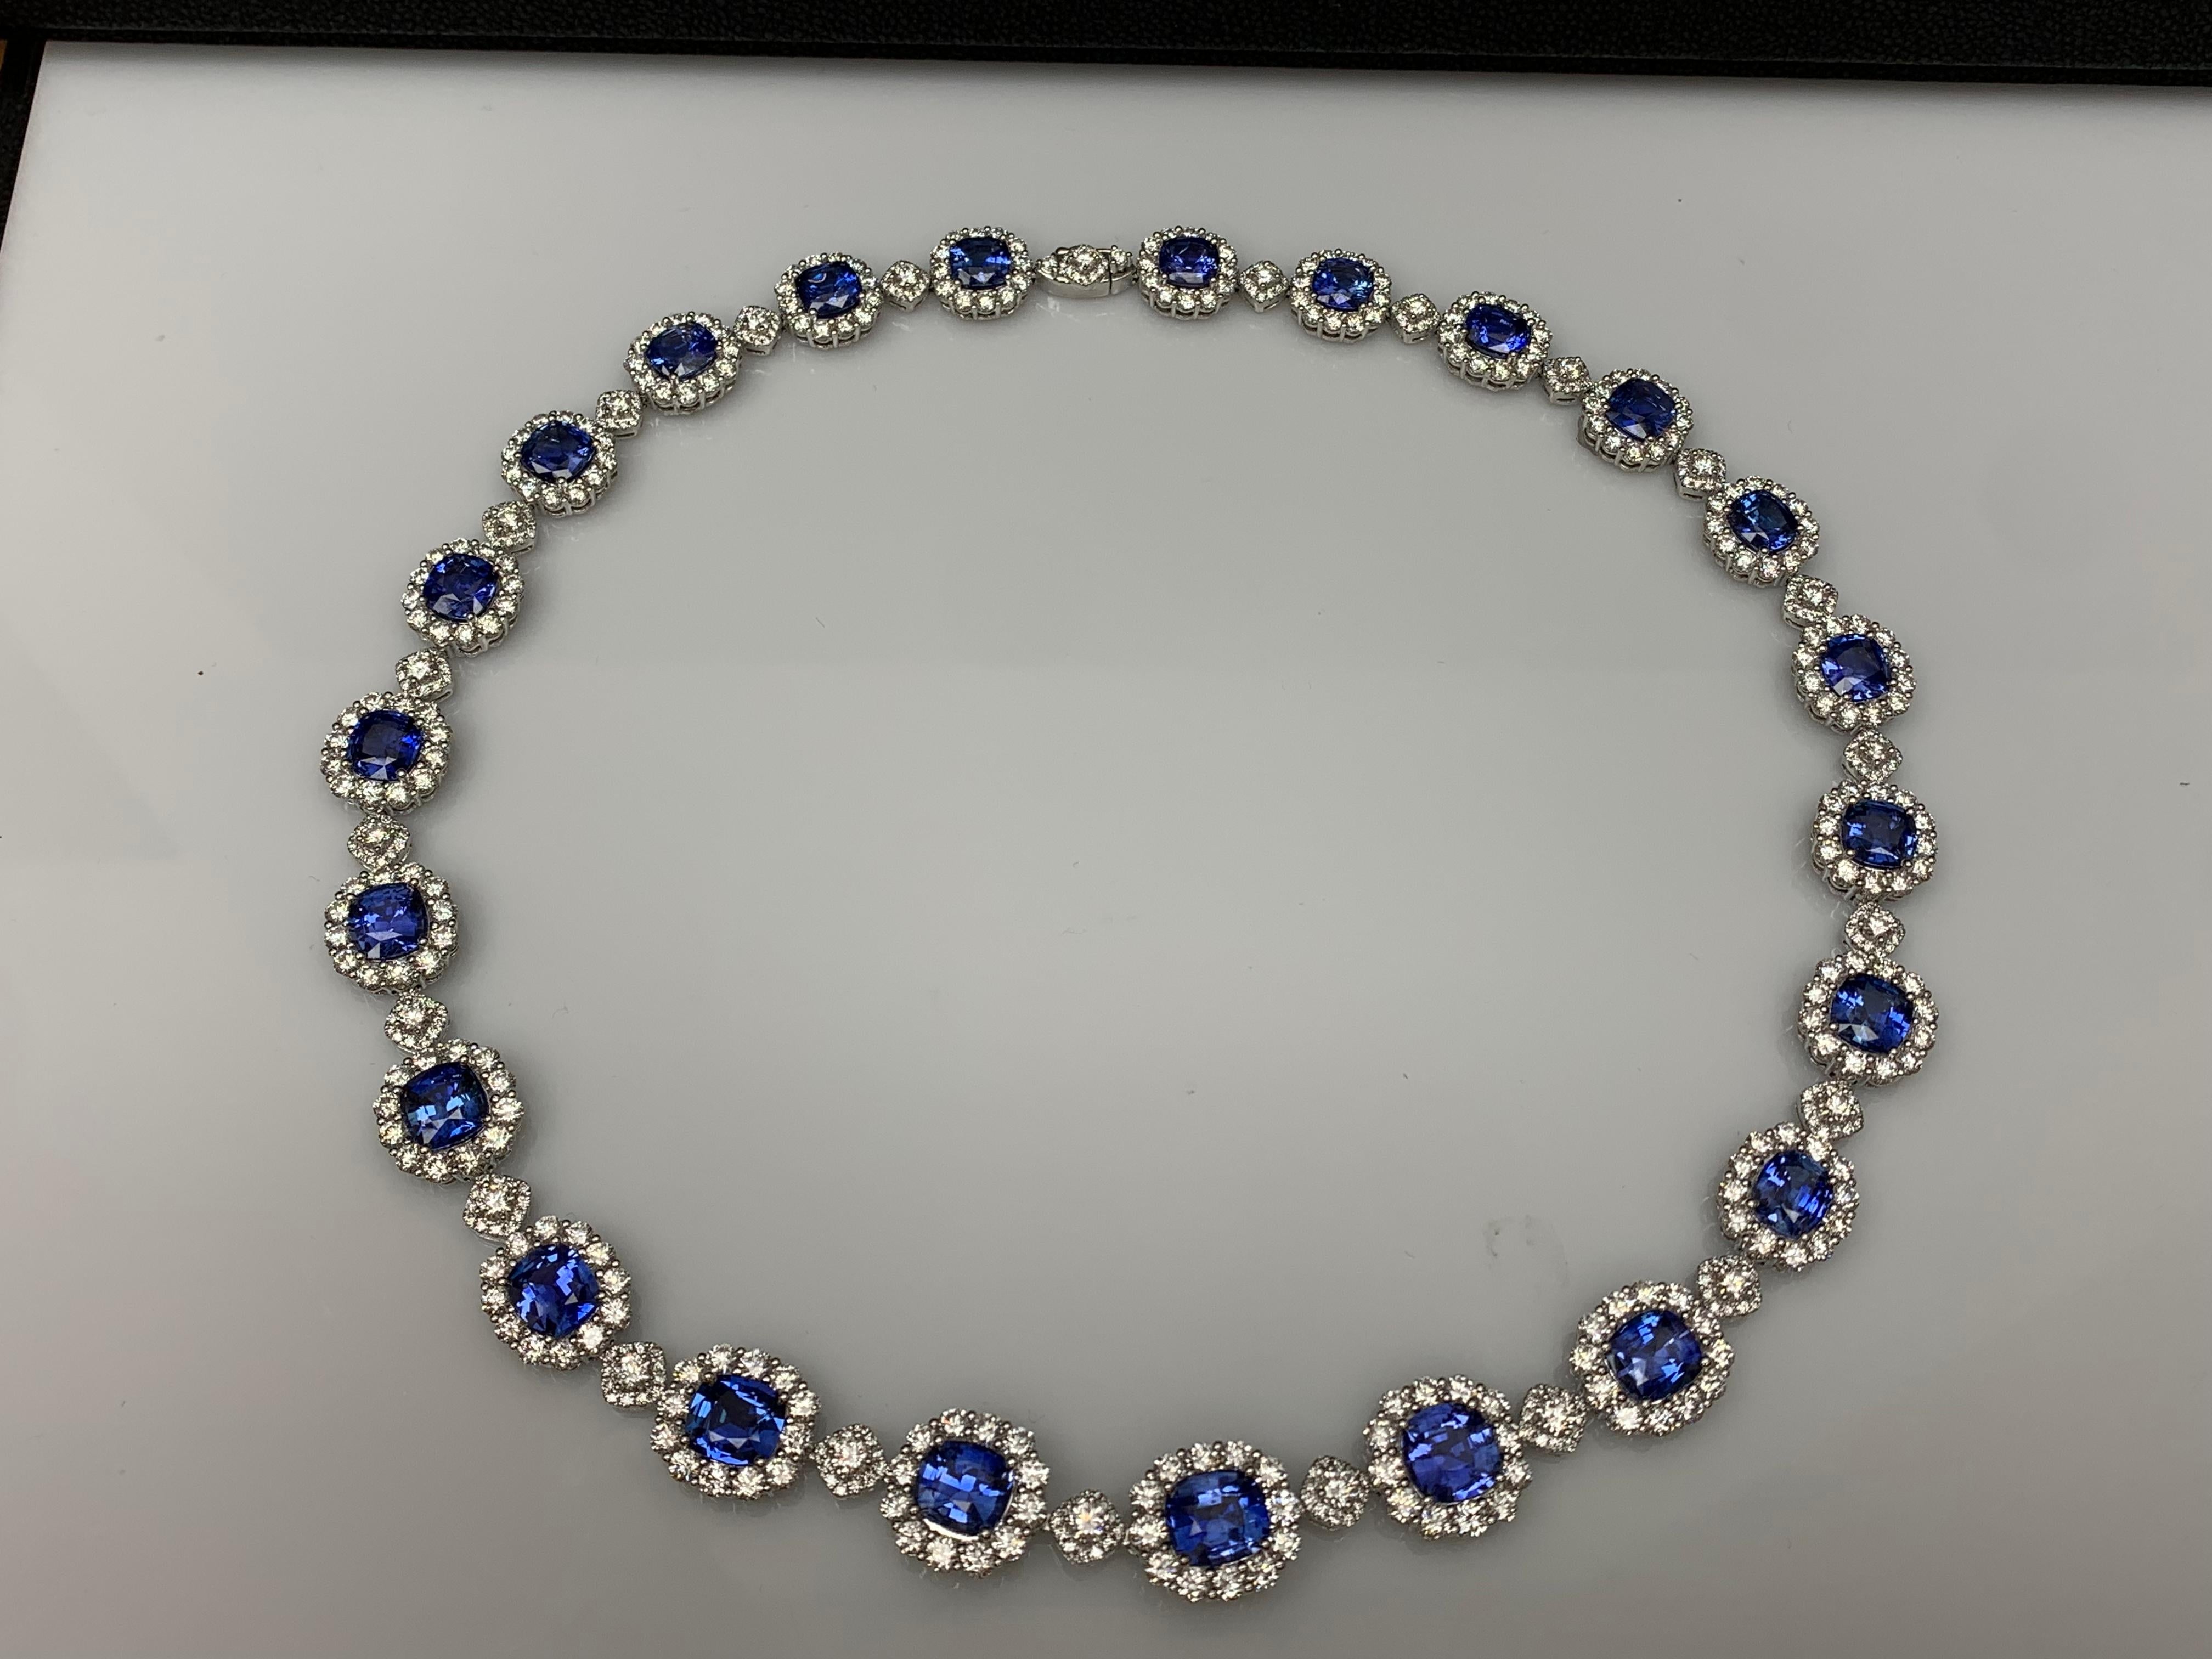 35.11 Carat Cushion Cut Blue Sapphire and Diamond Necklace in 18K White Gold For Sale 5